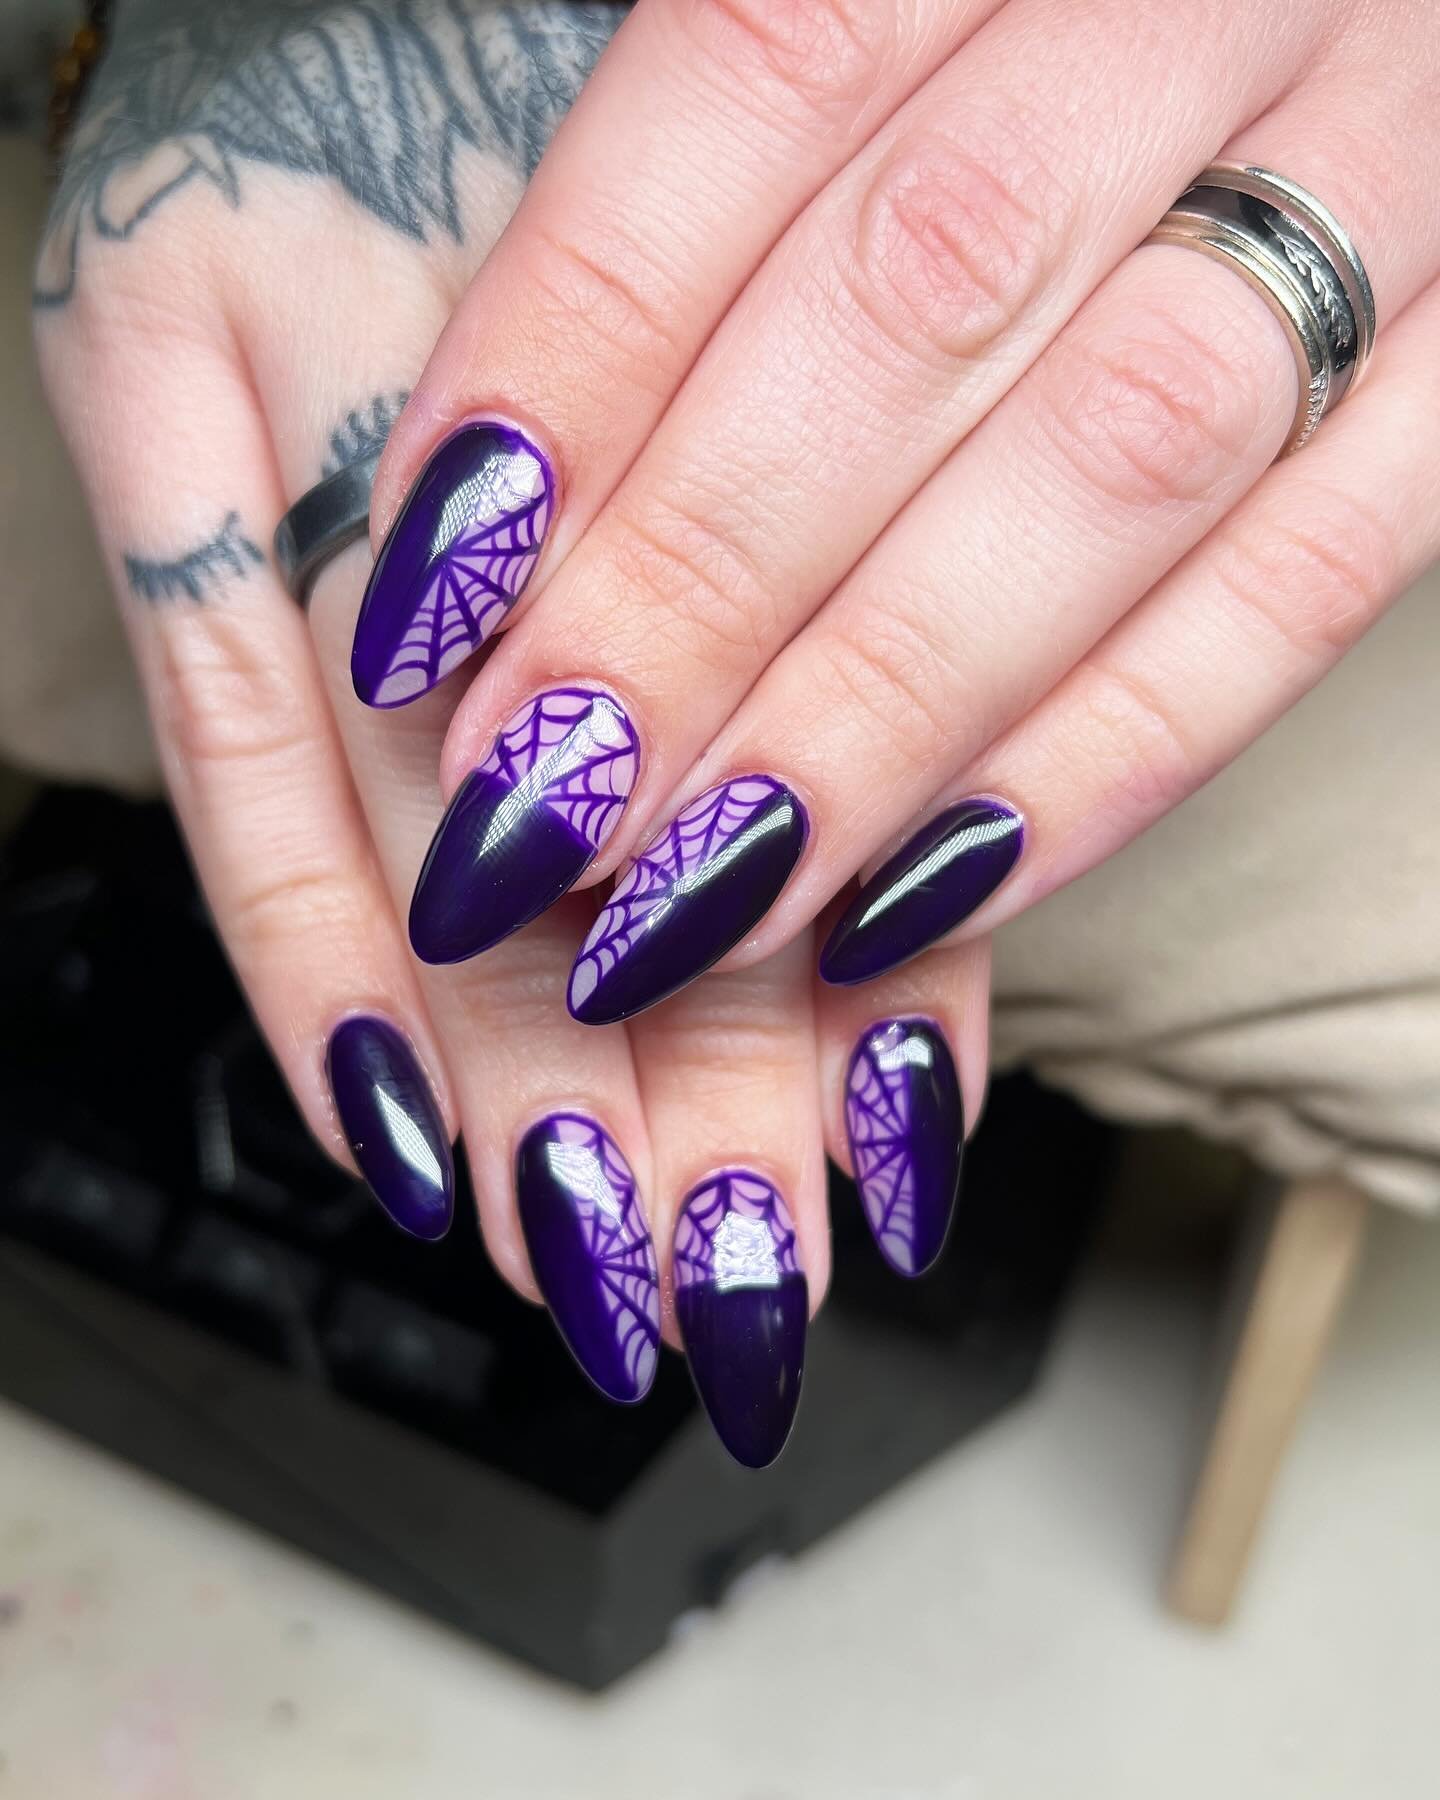 Webs for our April! 🕸️ #acrylicnails